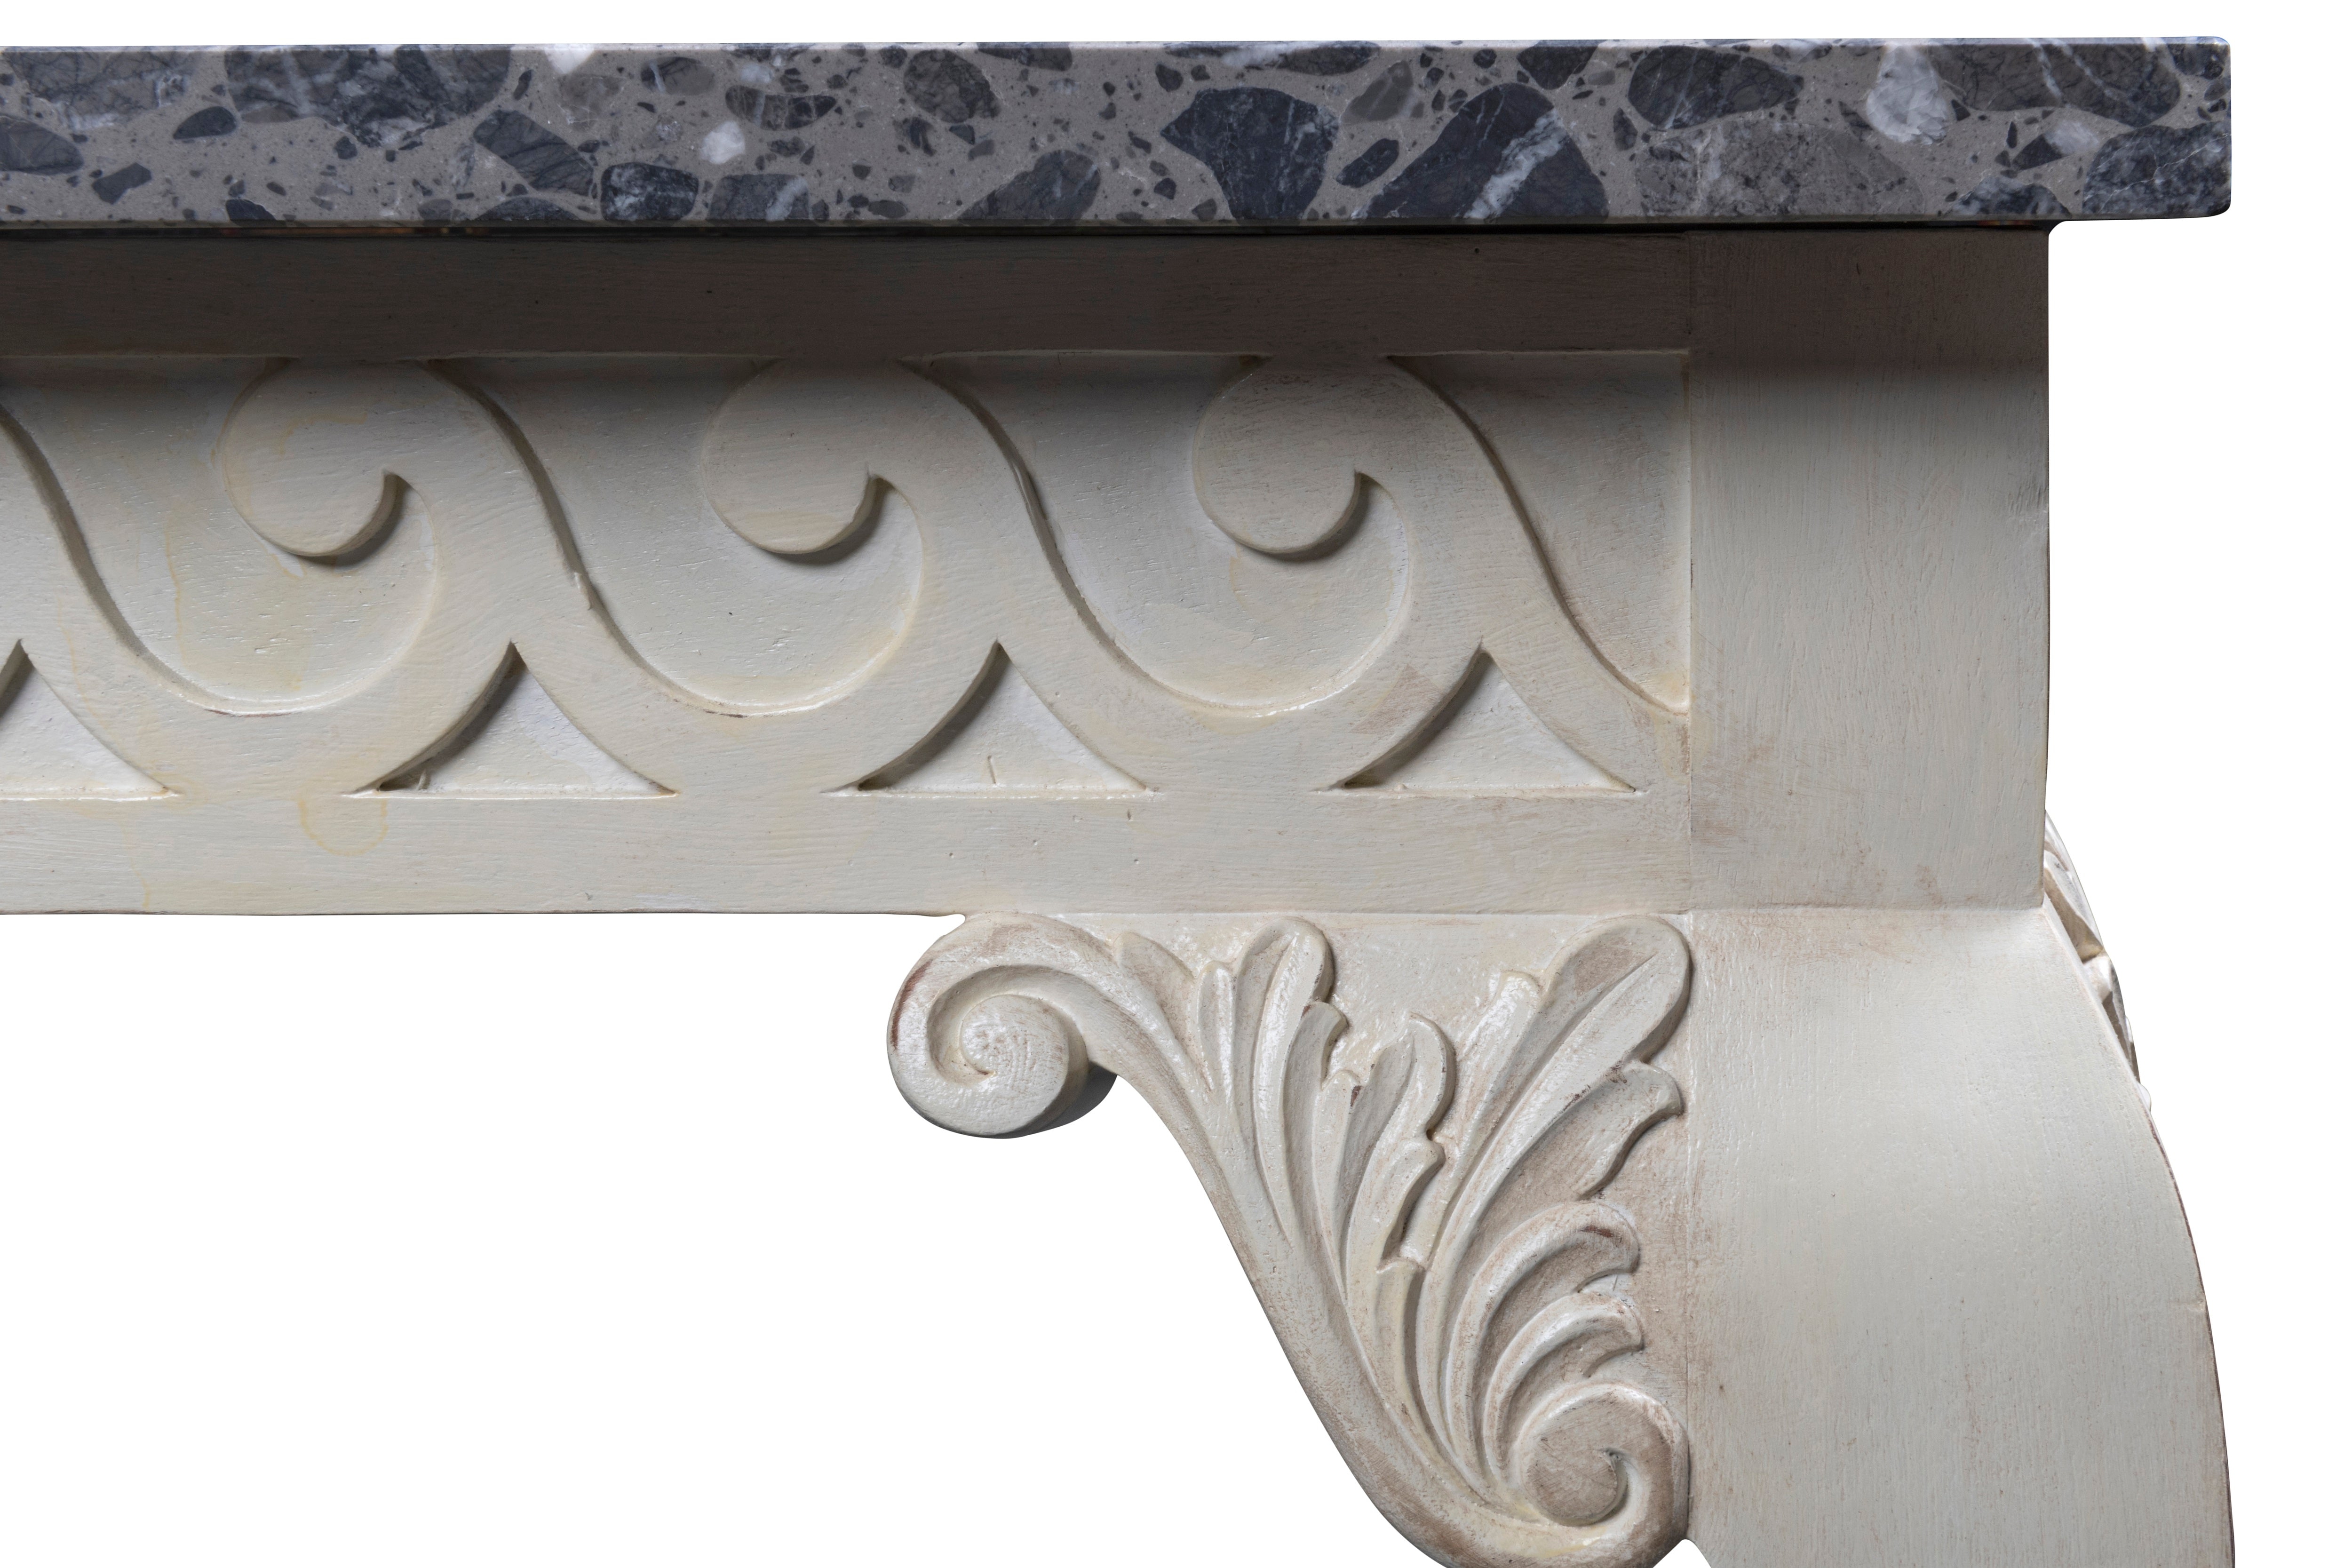 A William and Kent Style Marble Top Console